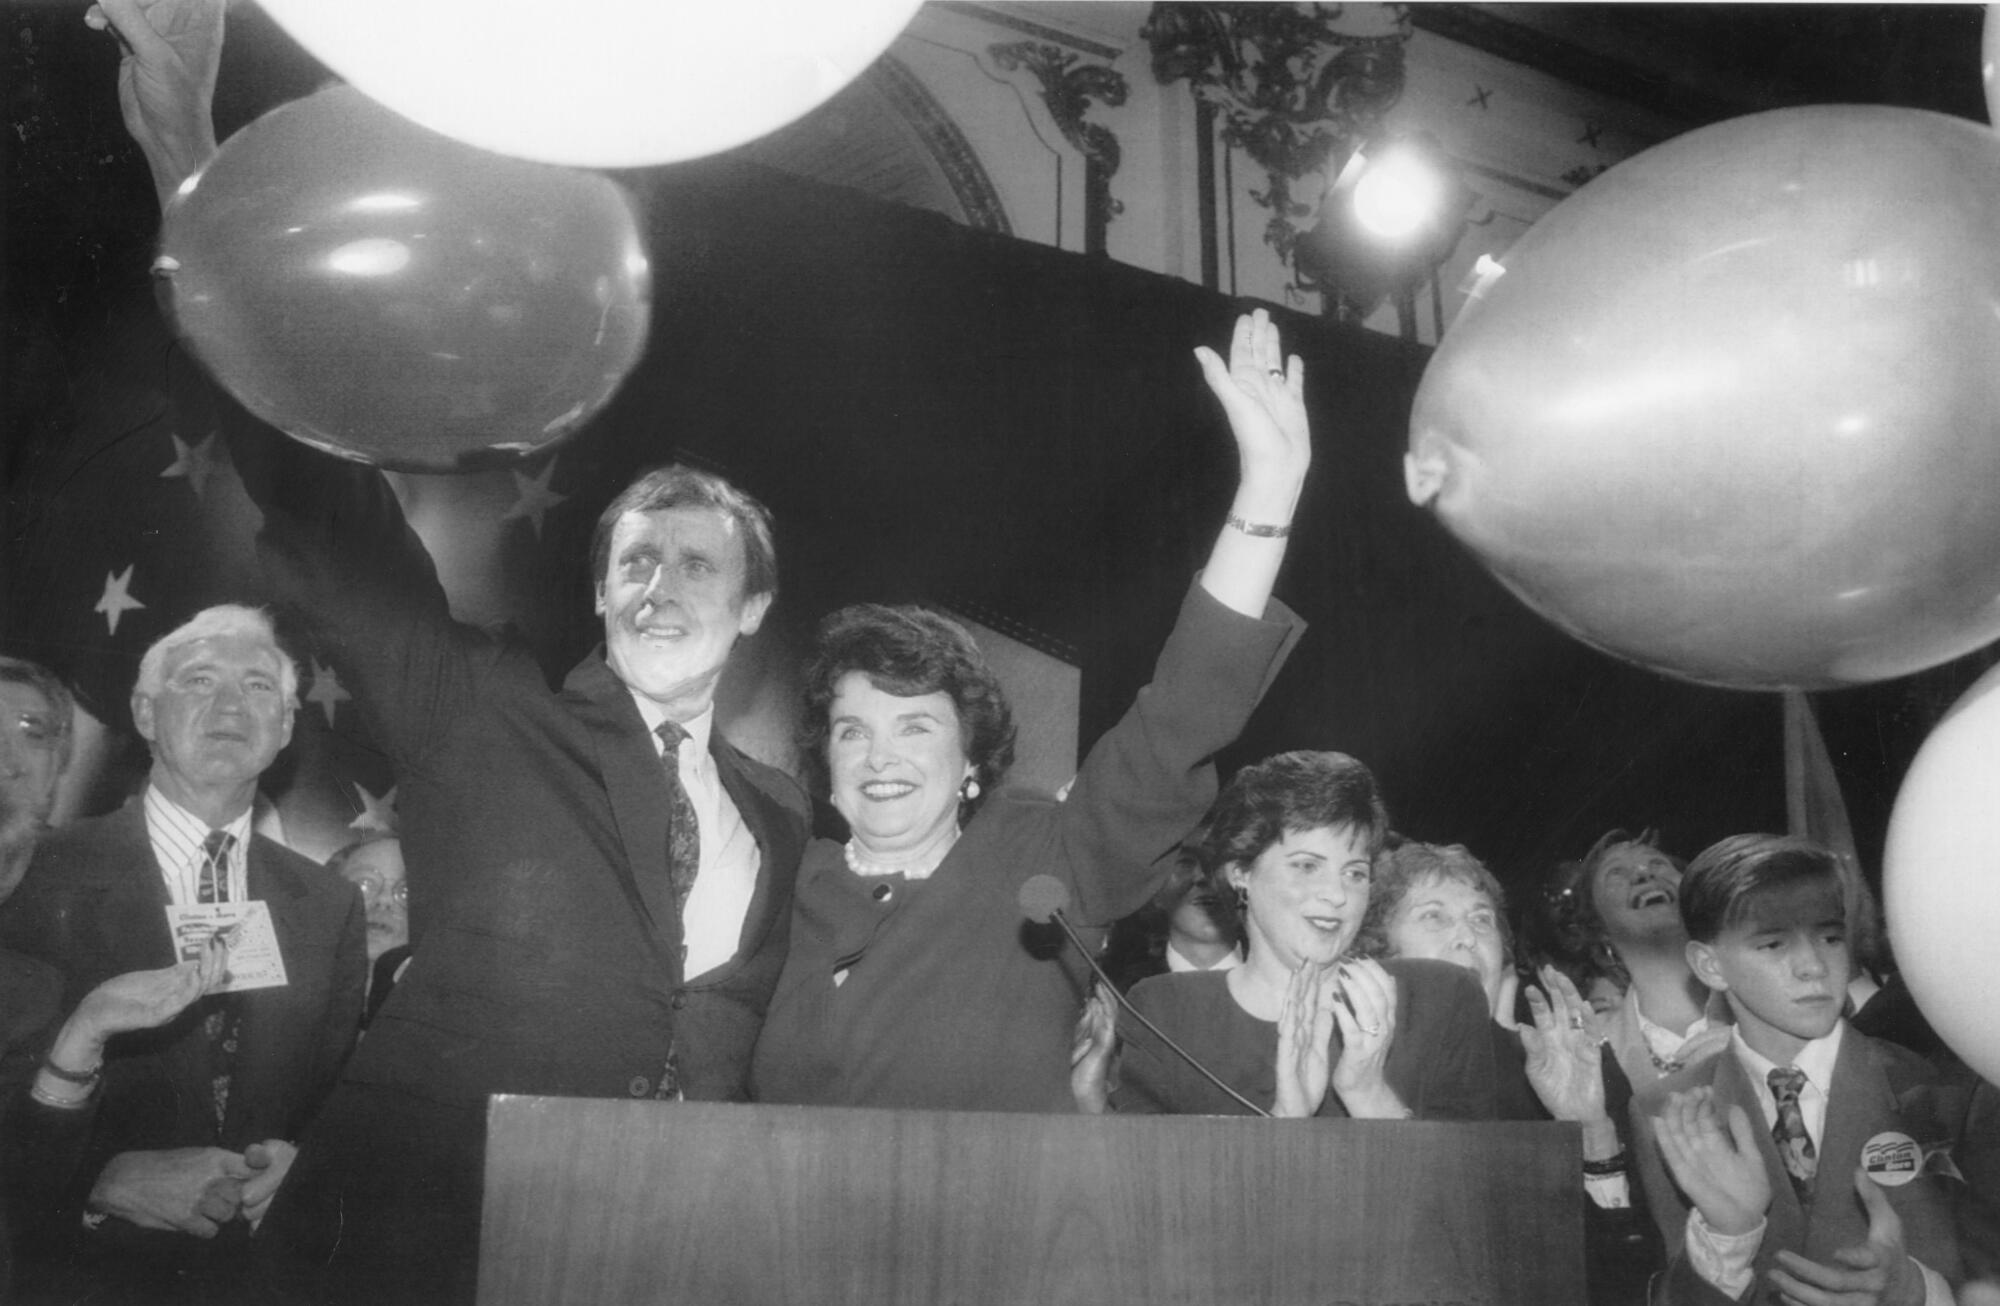 A black-and-white photo of Dianne Feinstein and third husband Richard Blum onstage at a rally with her daughter, Katherine.